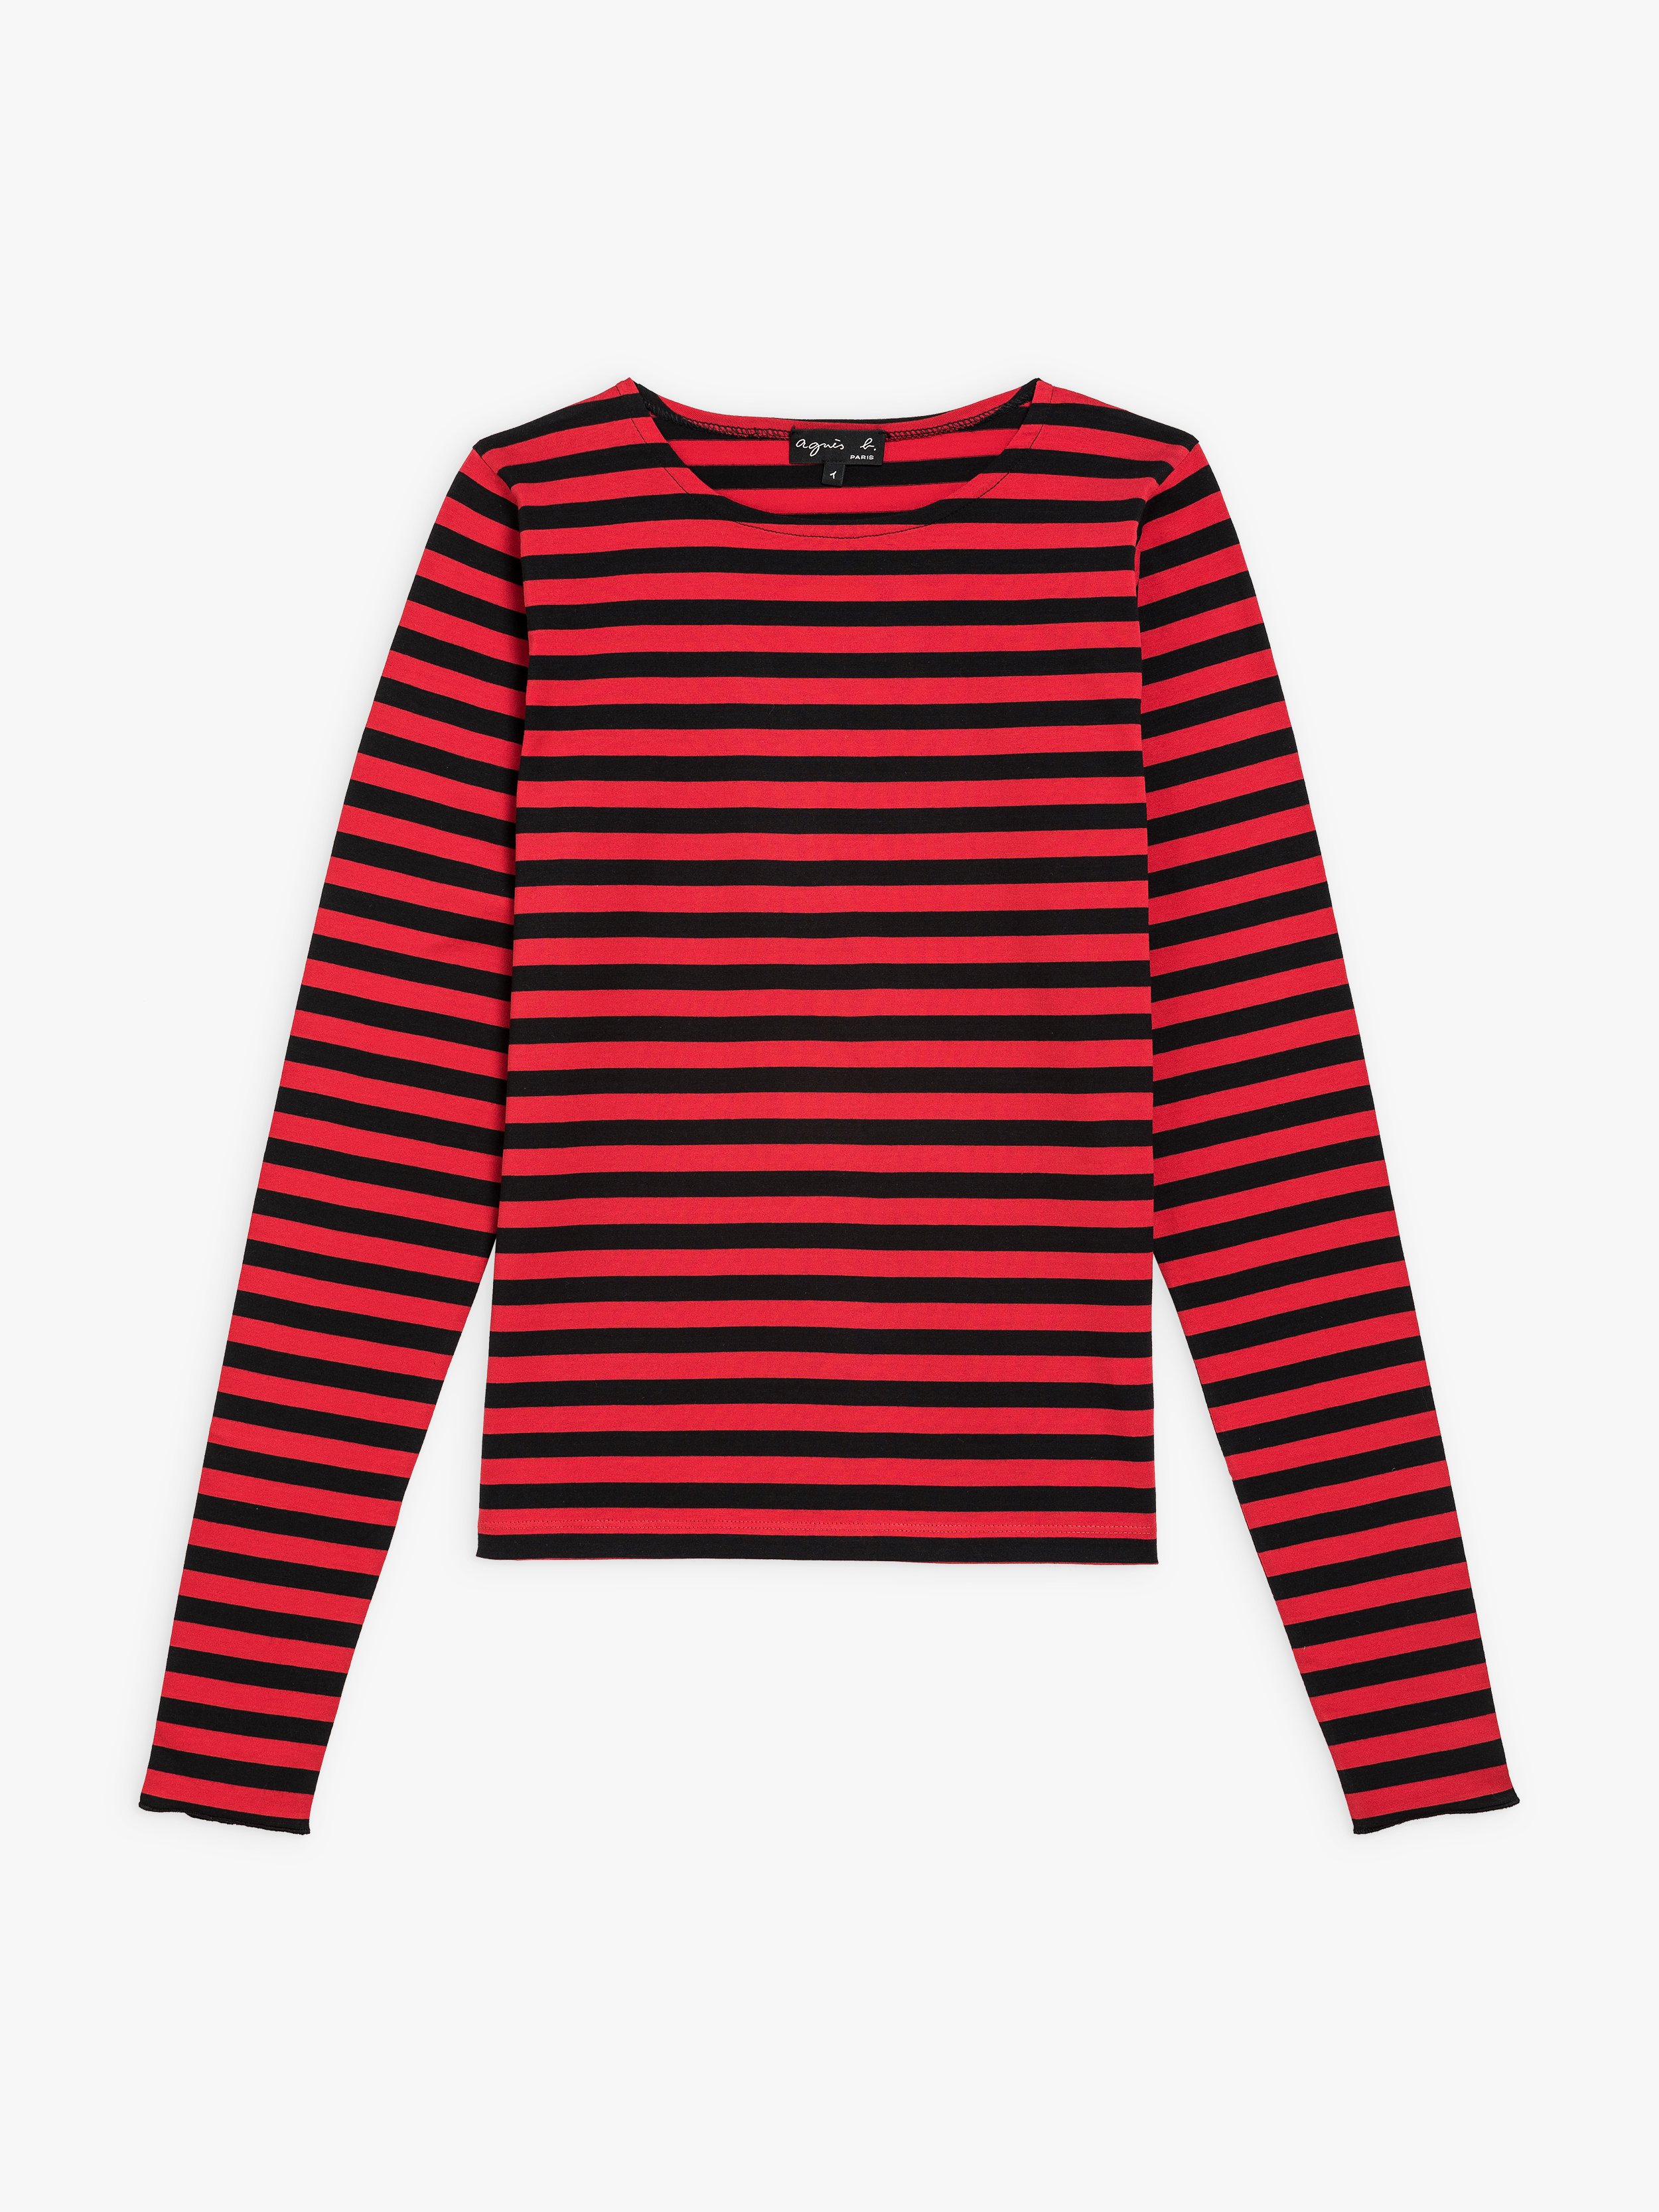 striped black and red shirt